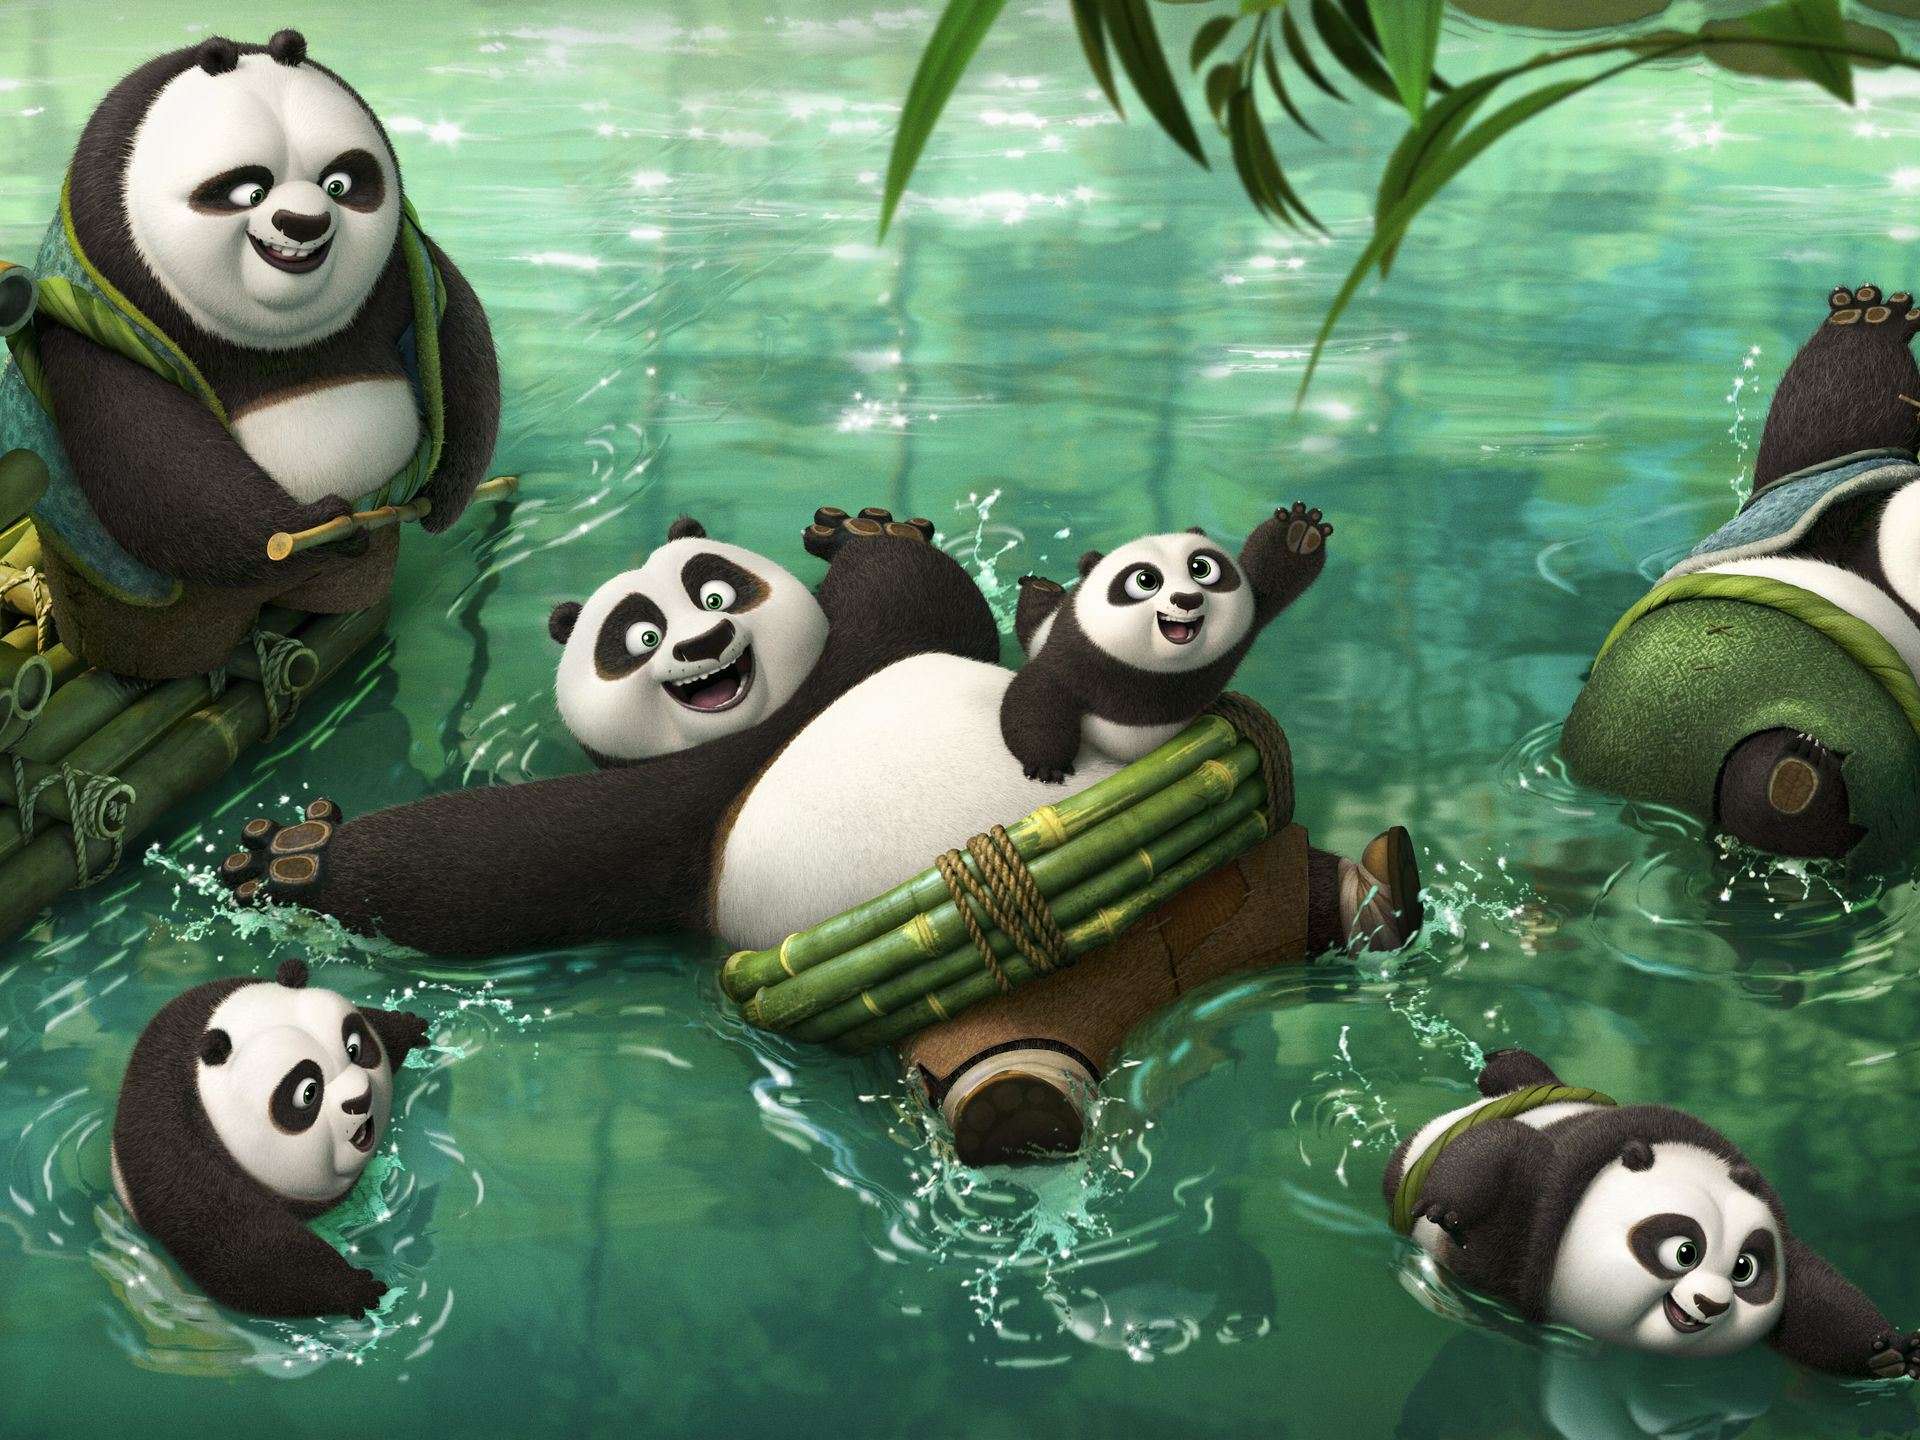 Kungfu Panda 3 Trailer: Everyone loves the Kungfu Panda series and the trailer for the third installment is out! Packed with action and humour, this movie promises to be an amazing time. Don\'t wait up, watch the trailer by clicking on the image related to this keyword to get a glimpse of Po\'s new adventure!